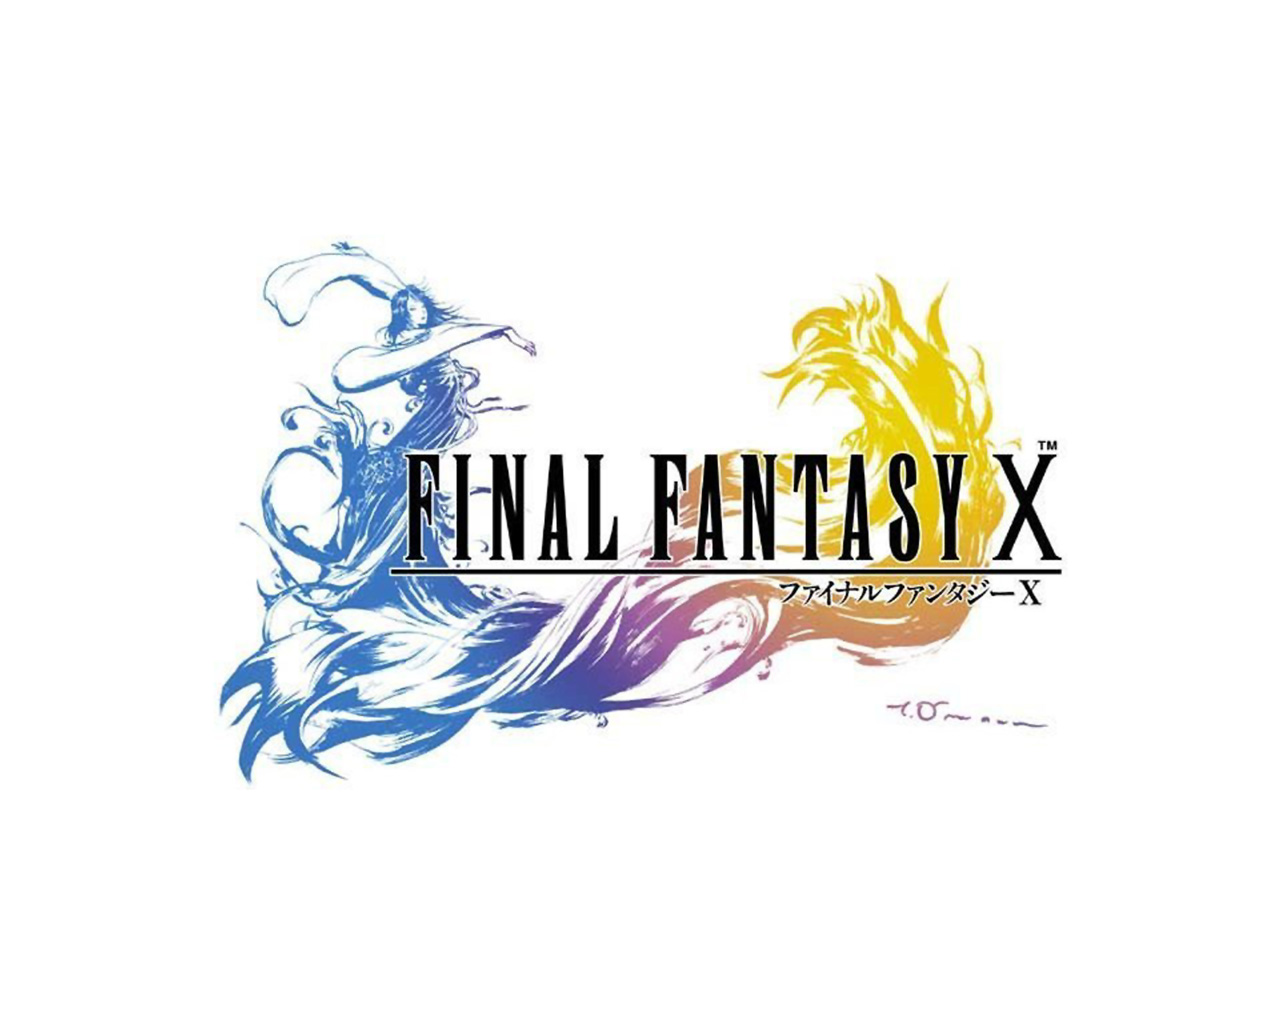 Final Fantasy X logo (with the title)